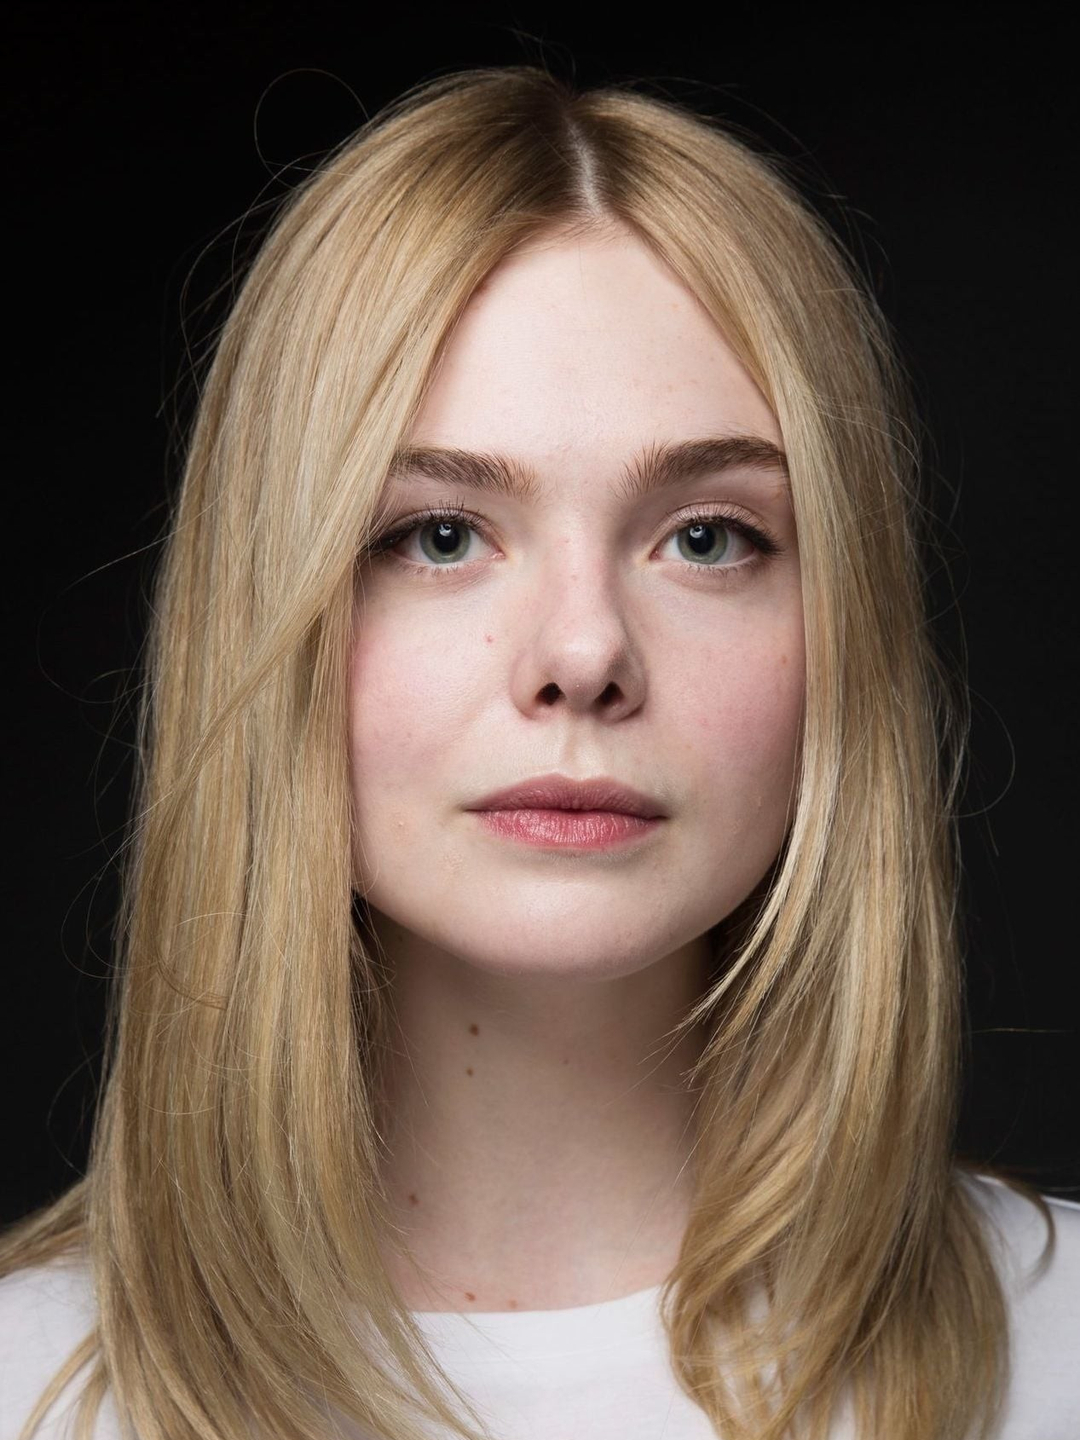 Elle Fanning in her youth